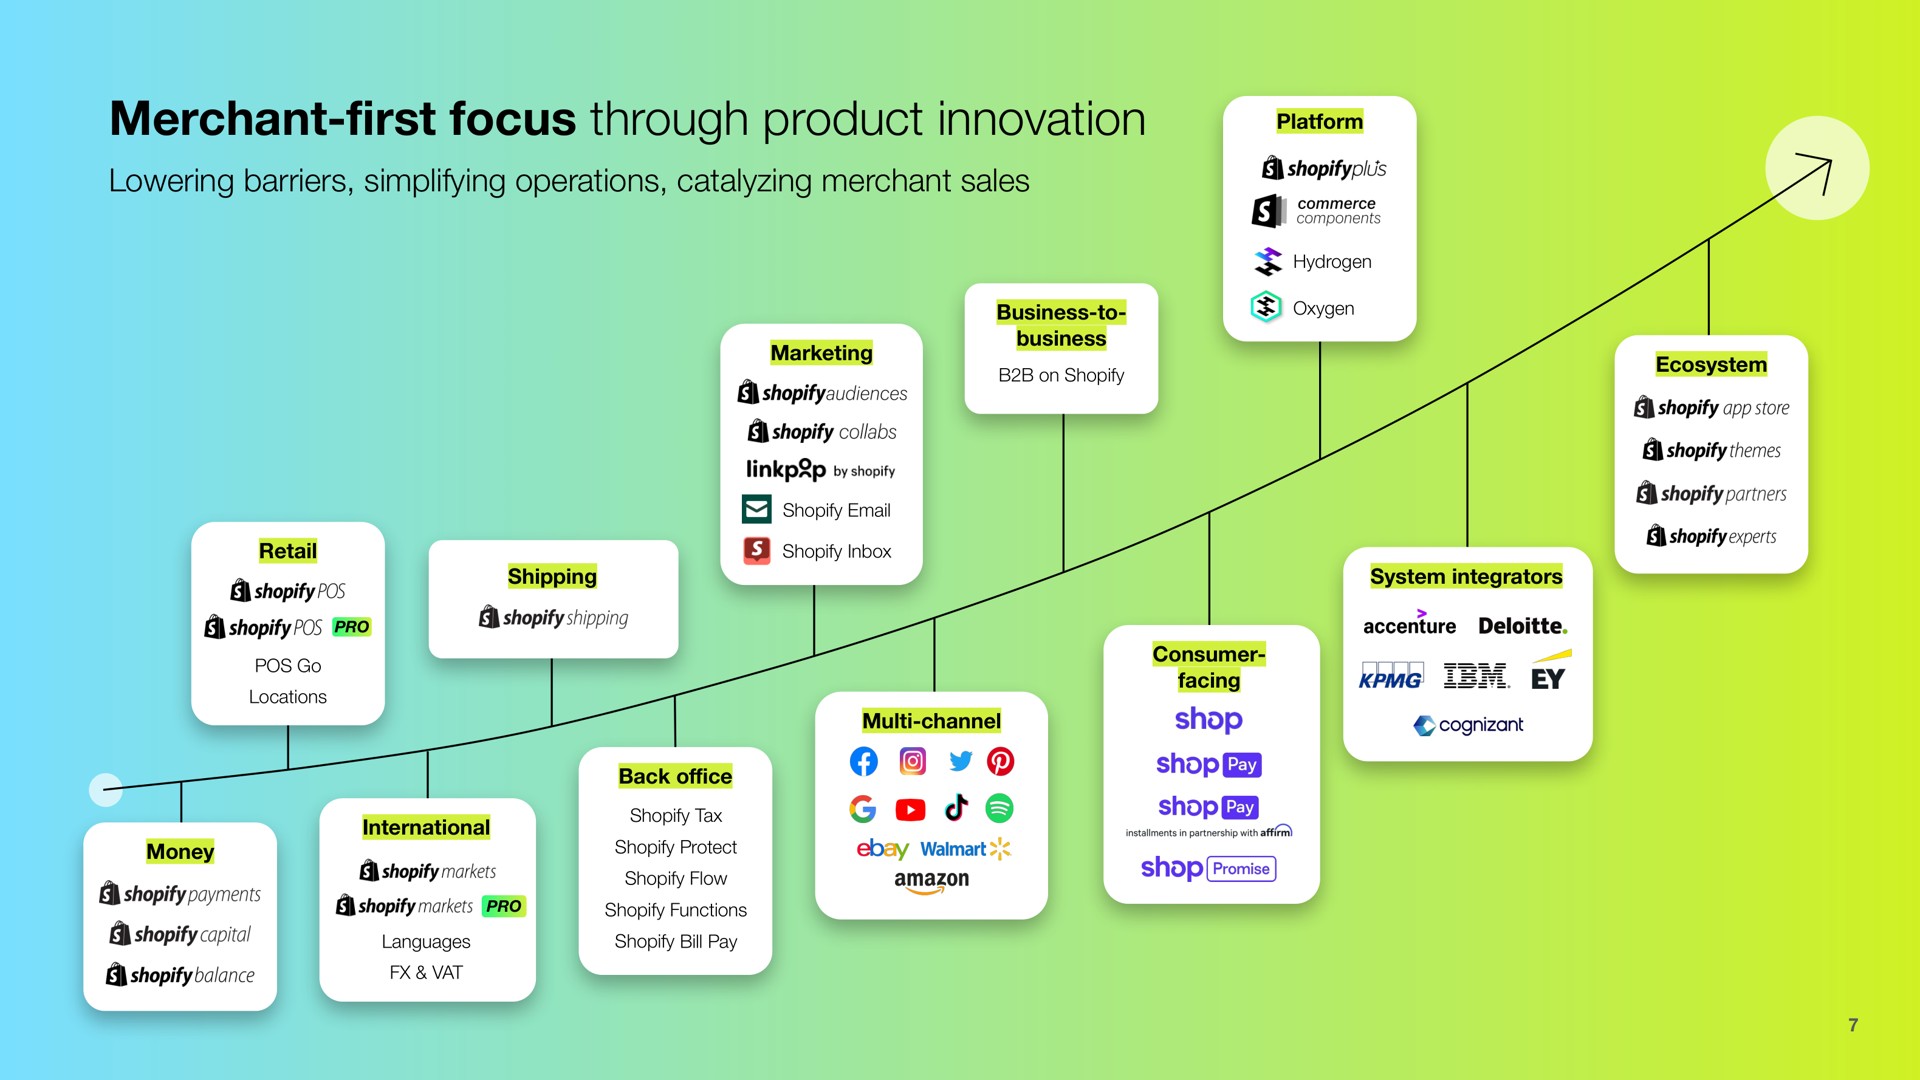 merchant focus through product innovation merchant first lowering barriers simplifying operations catalyzing merchant sales platform | Shopify